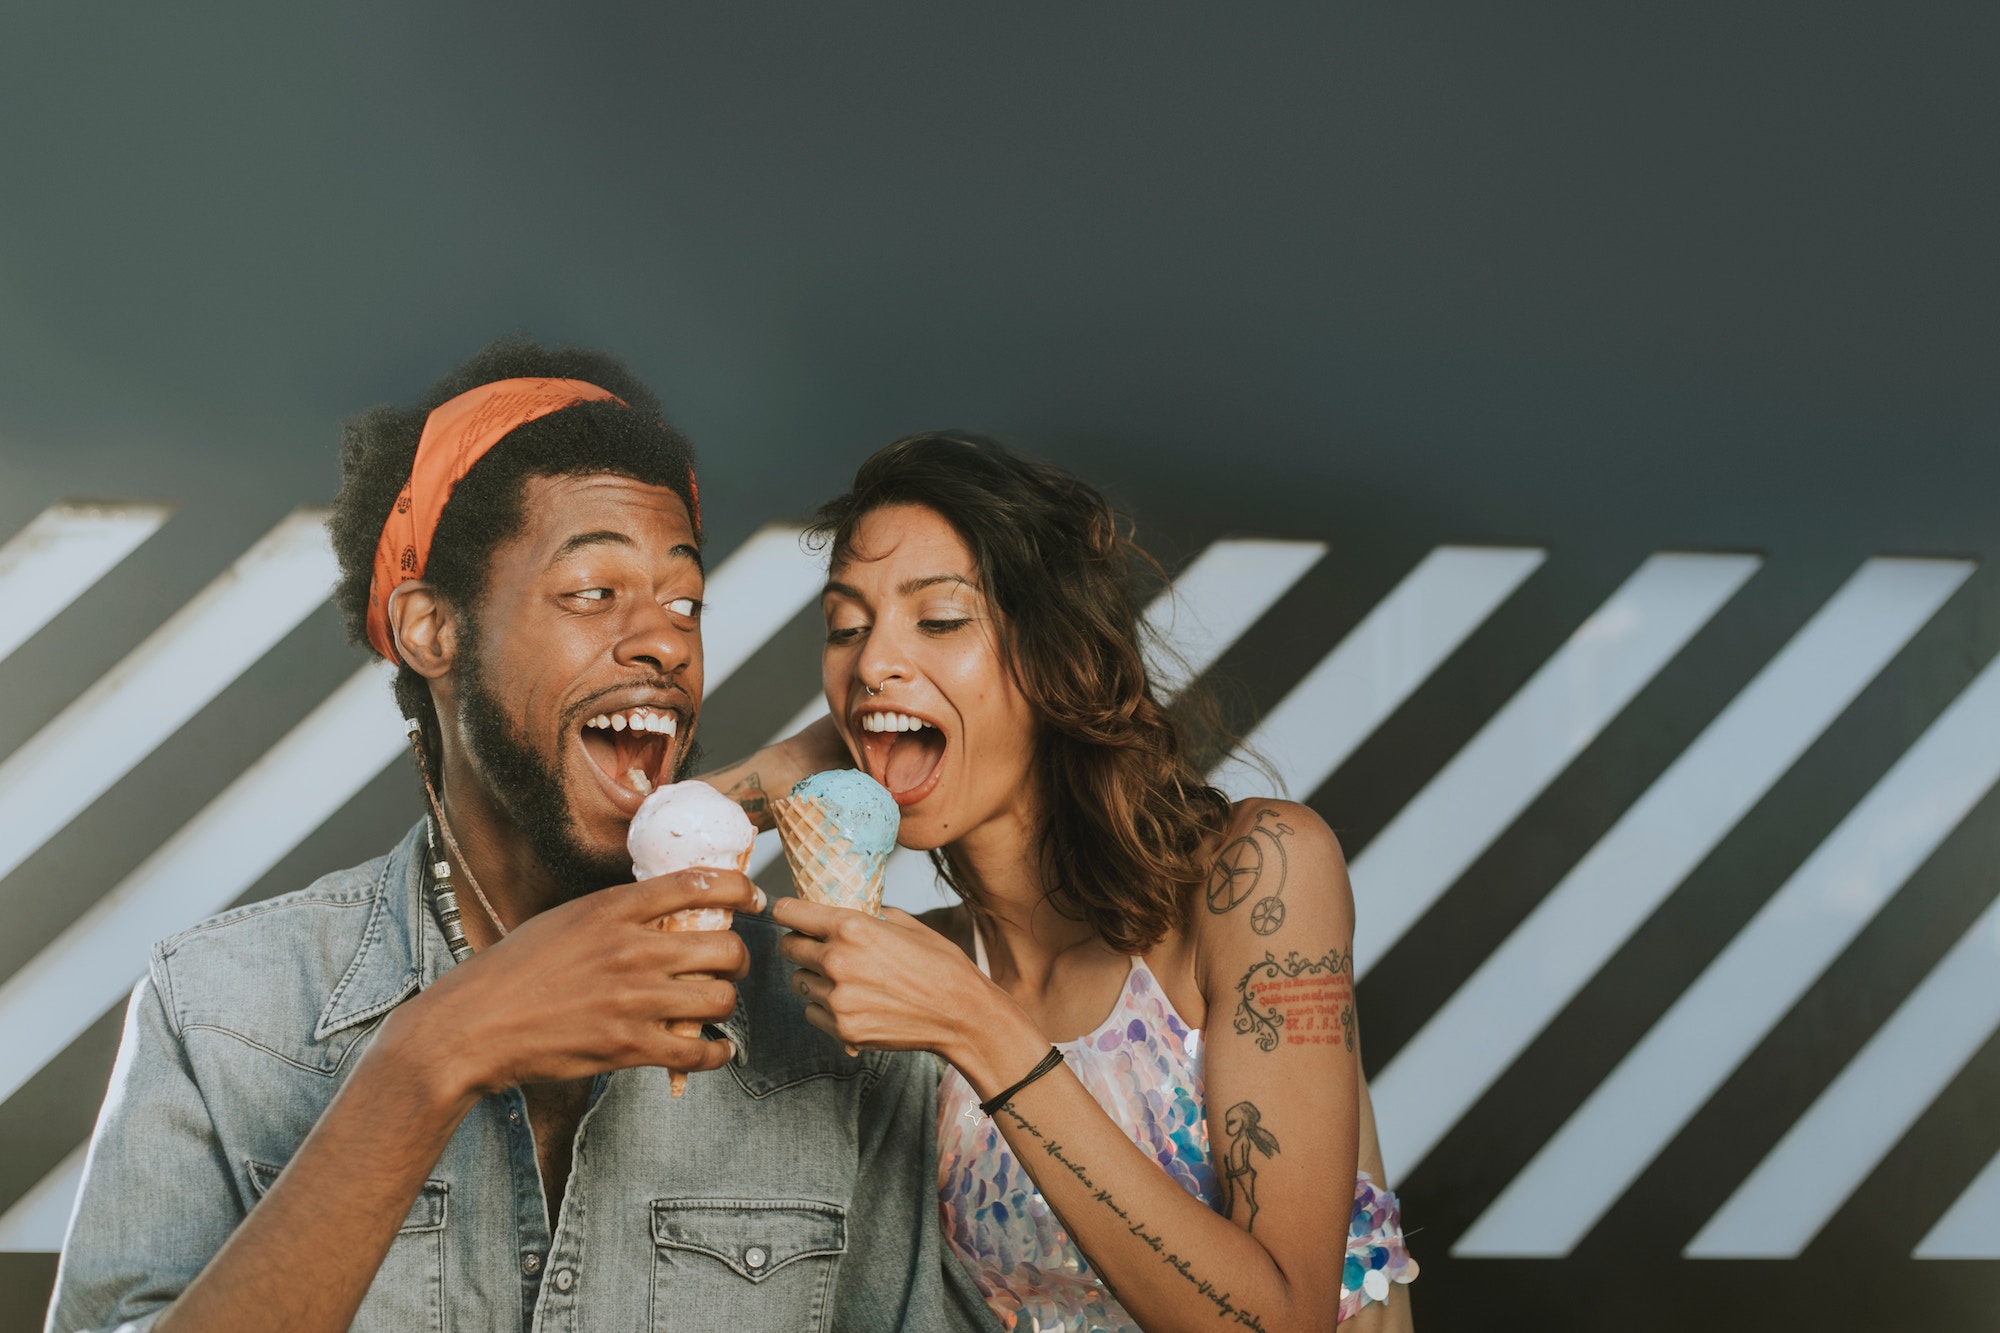 Mixed race couple makes silly faces at one another while eating ice cream in front of a funky background